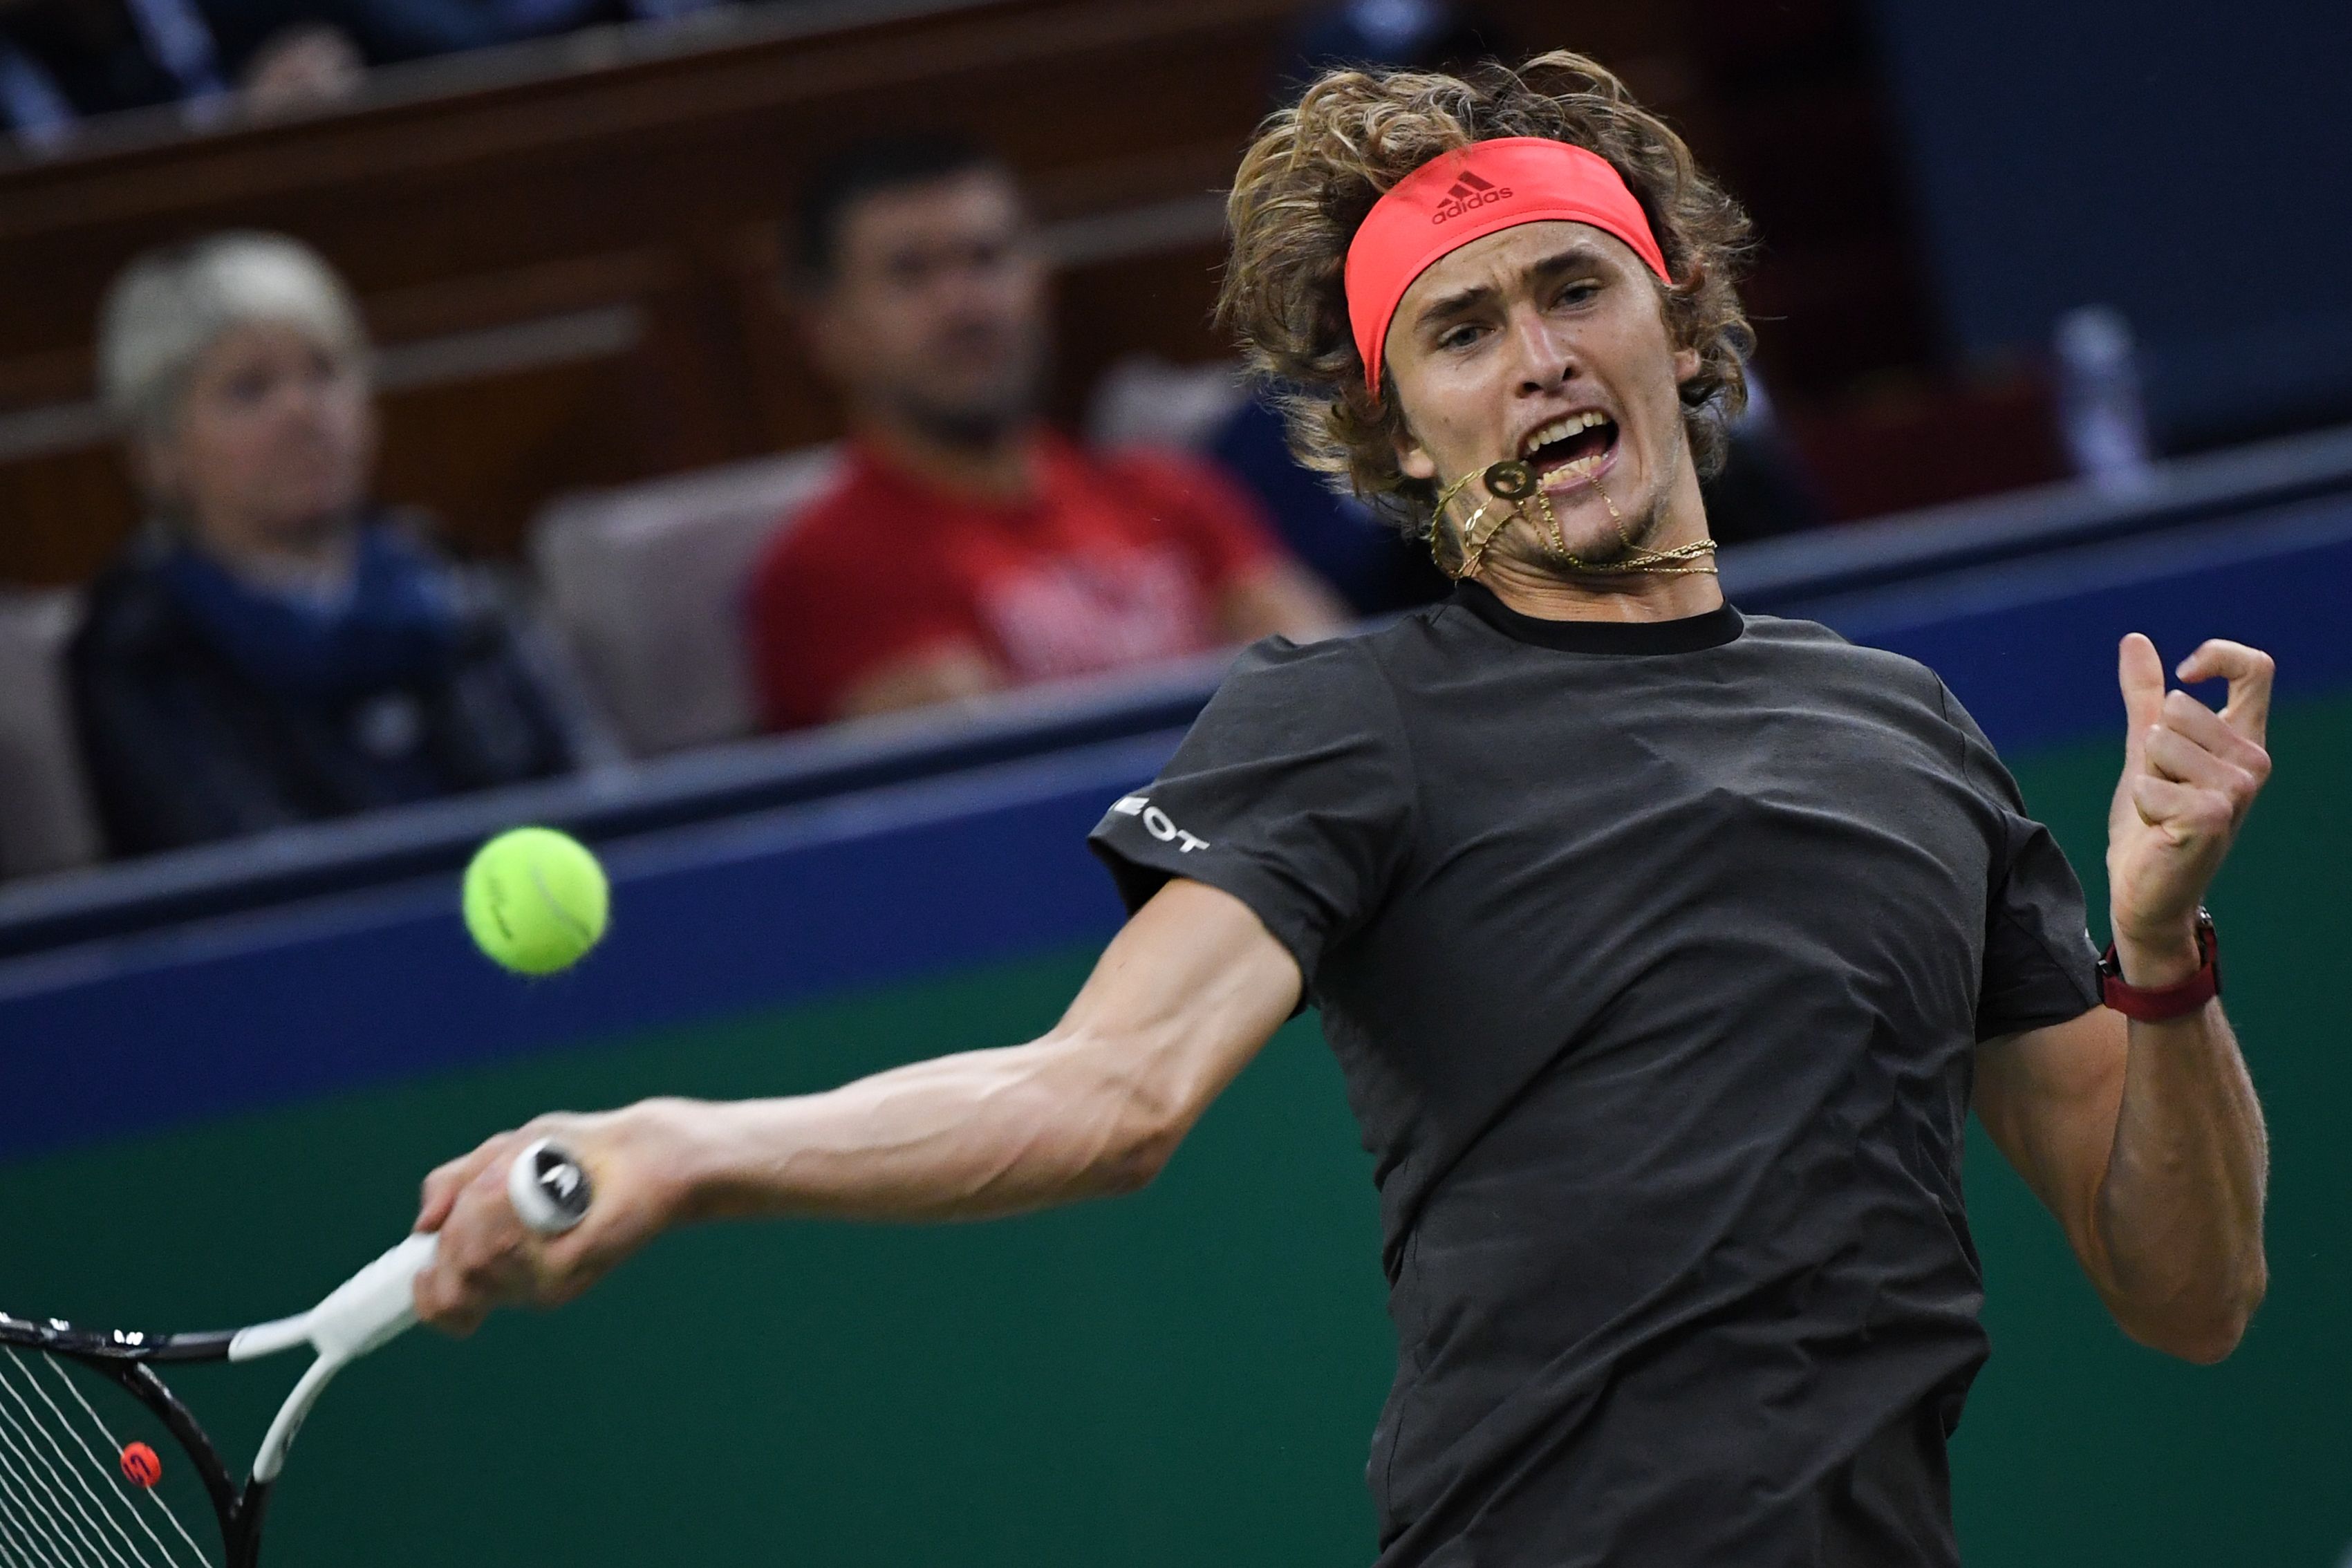 Alexander Zverev first to reach 50 wins on ATP with victory over Haase